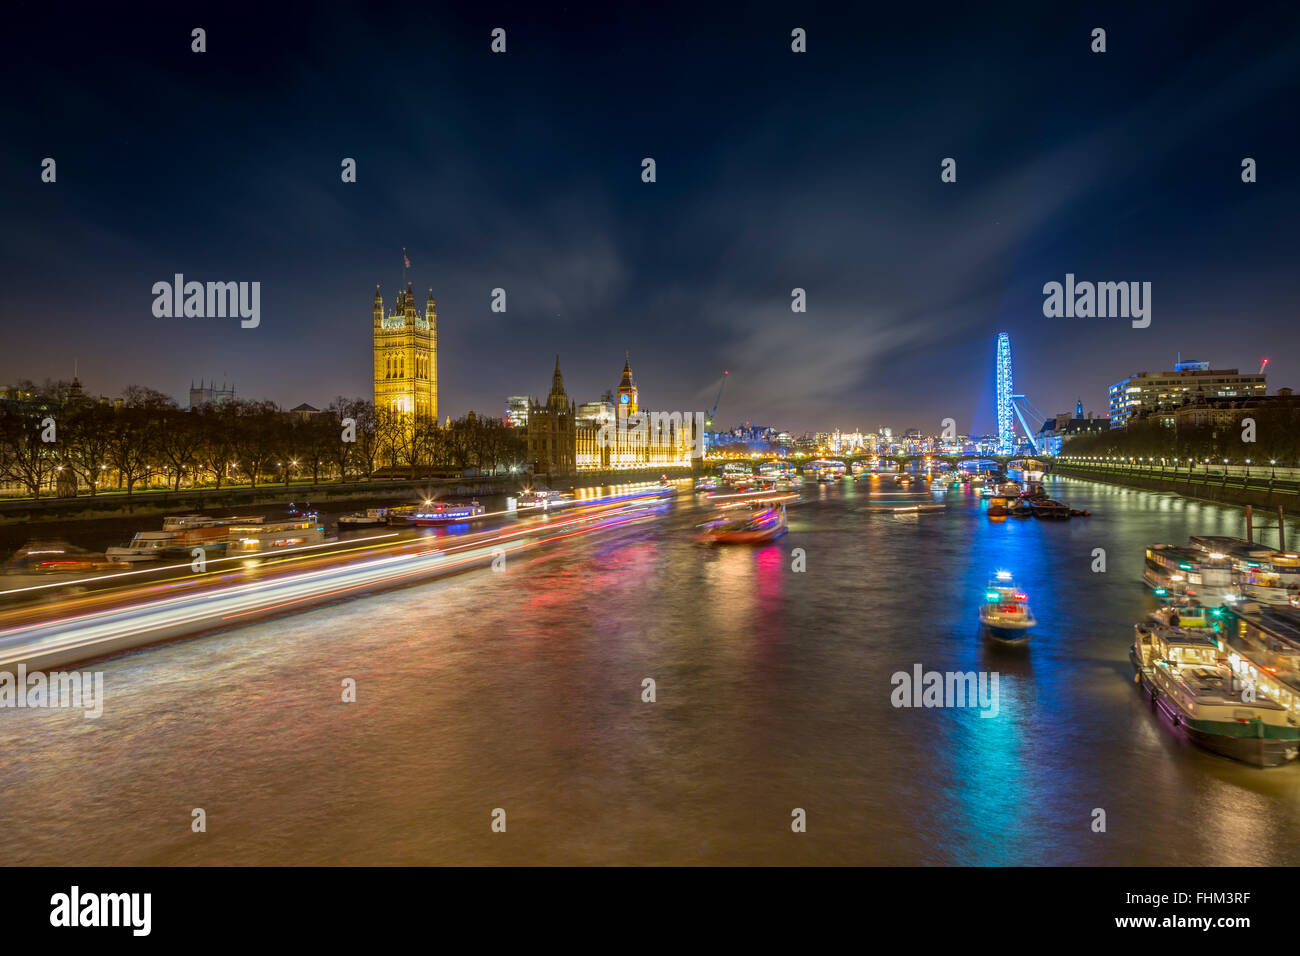 UK, London, view to River Thames with Palace of Westminster and London Eye at night Stock Photo